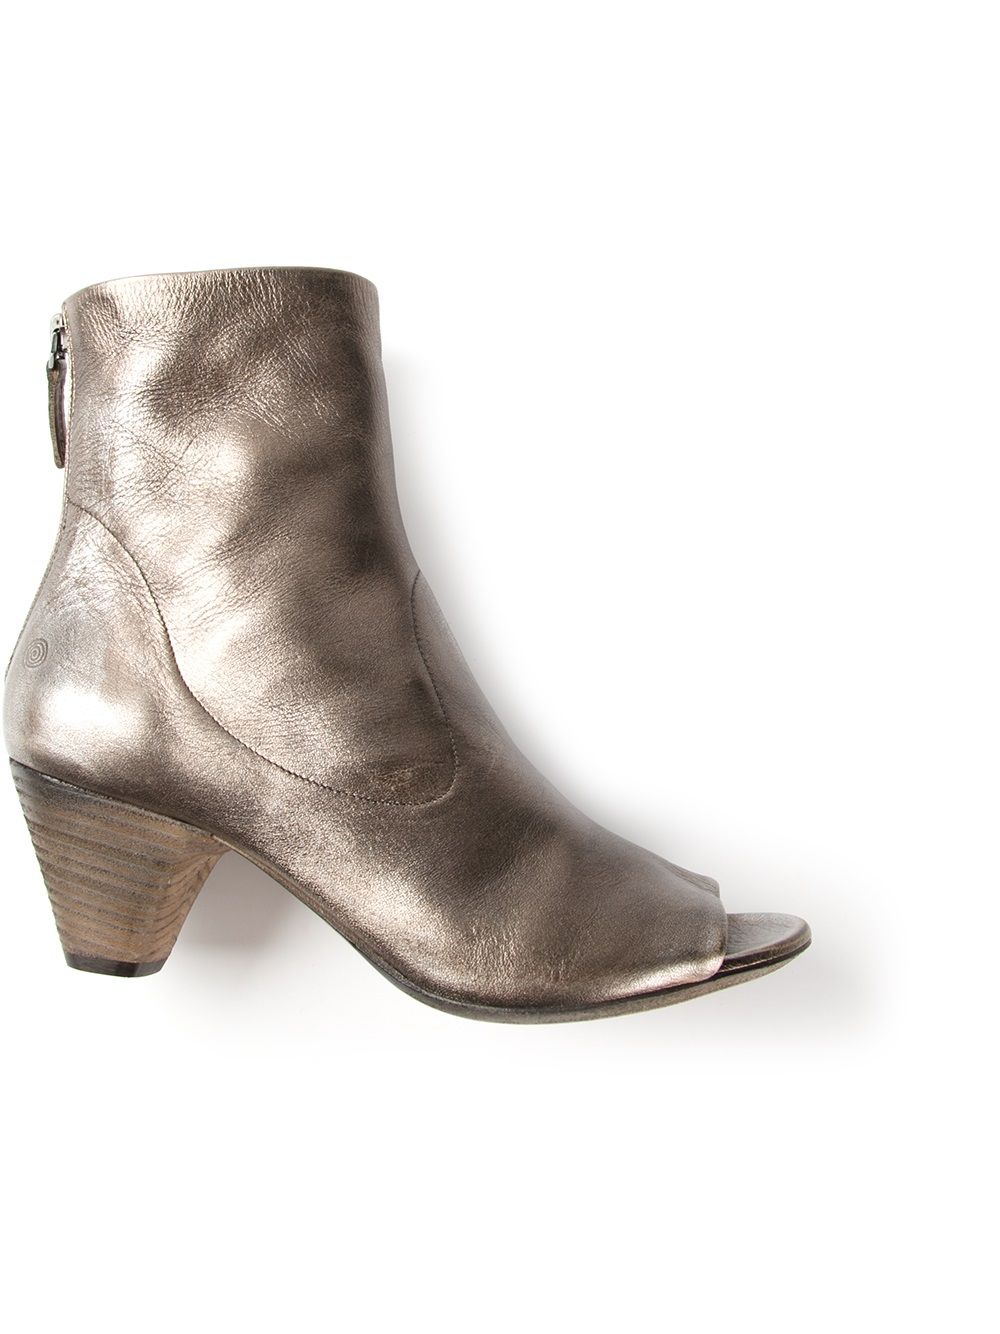 Marsell Open Toe Ankle Boot in Gold (metallic) | Lyst